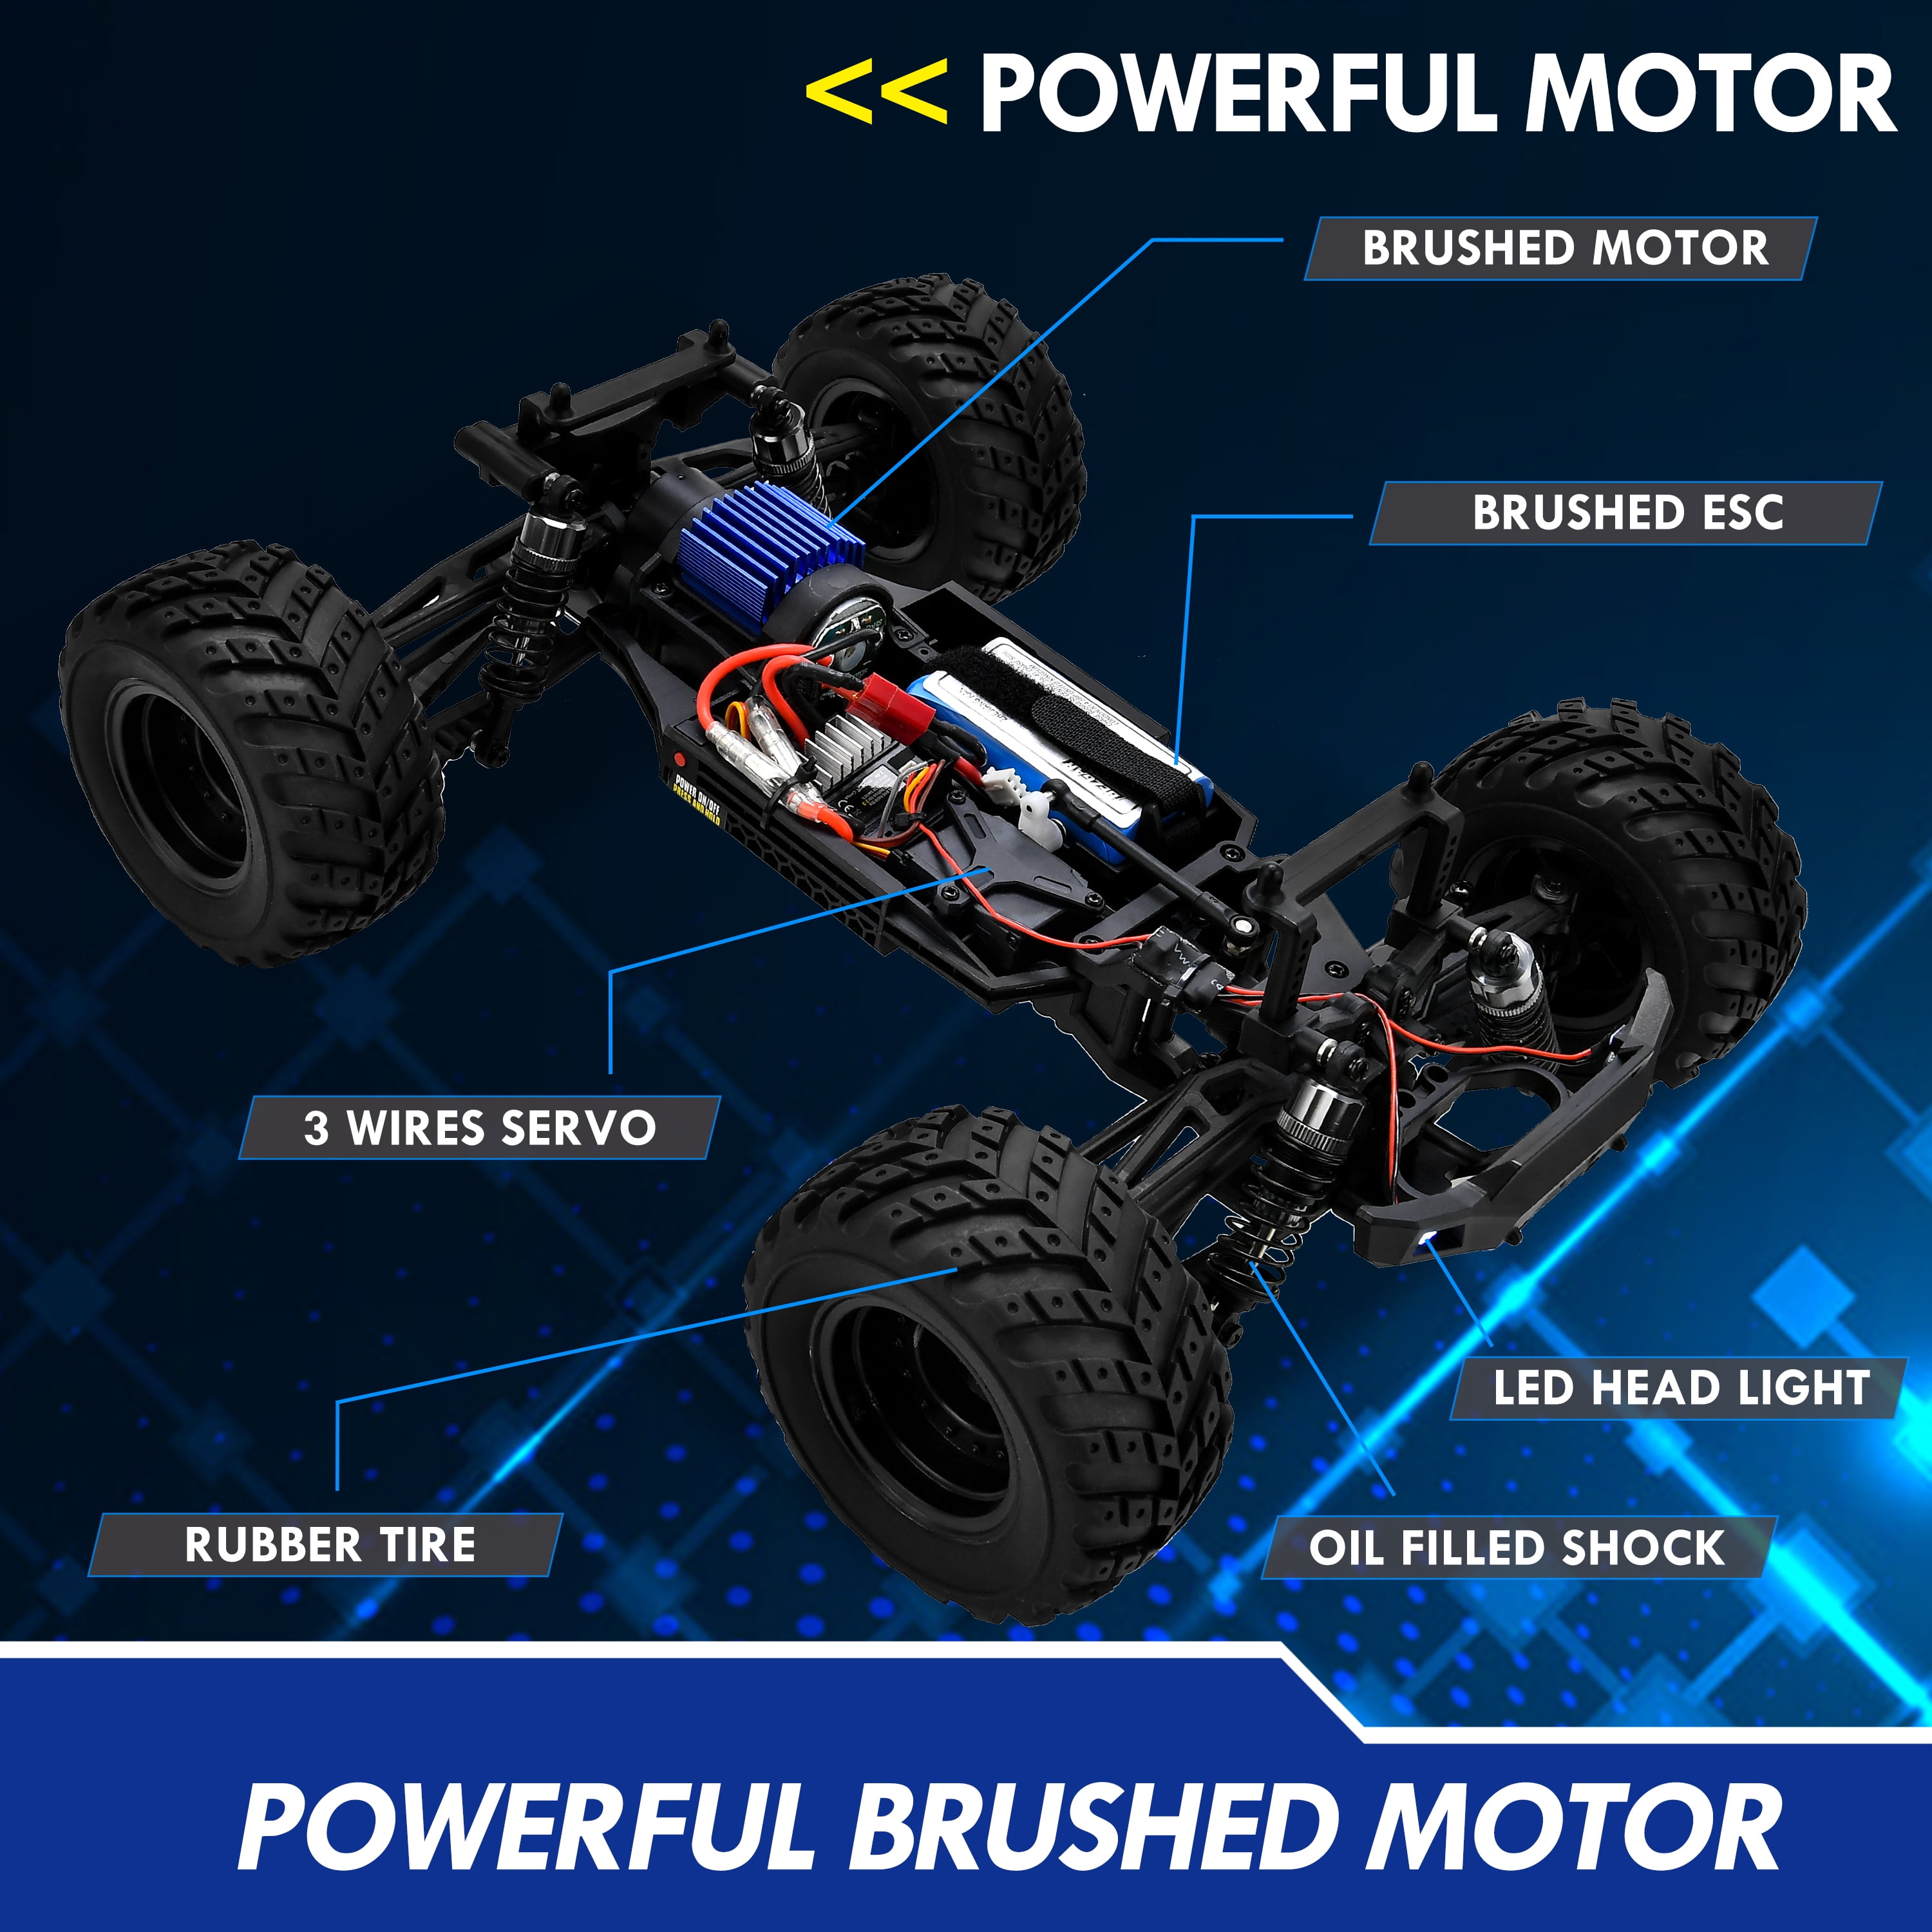  YONCHER YC300 RC Car 1:12 RC Monster Truck, 45+ Km/h Hobby Fast  Remote Control Cars for Boys Age 8-12, 4WD RC Trucks 4x4 Offroad Waterproof  All Terrains for Adults with 2